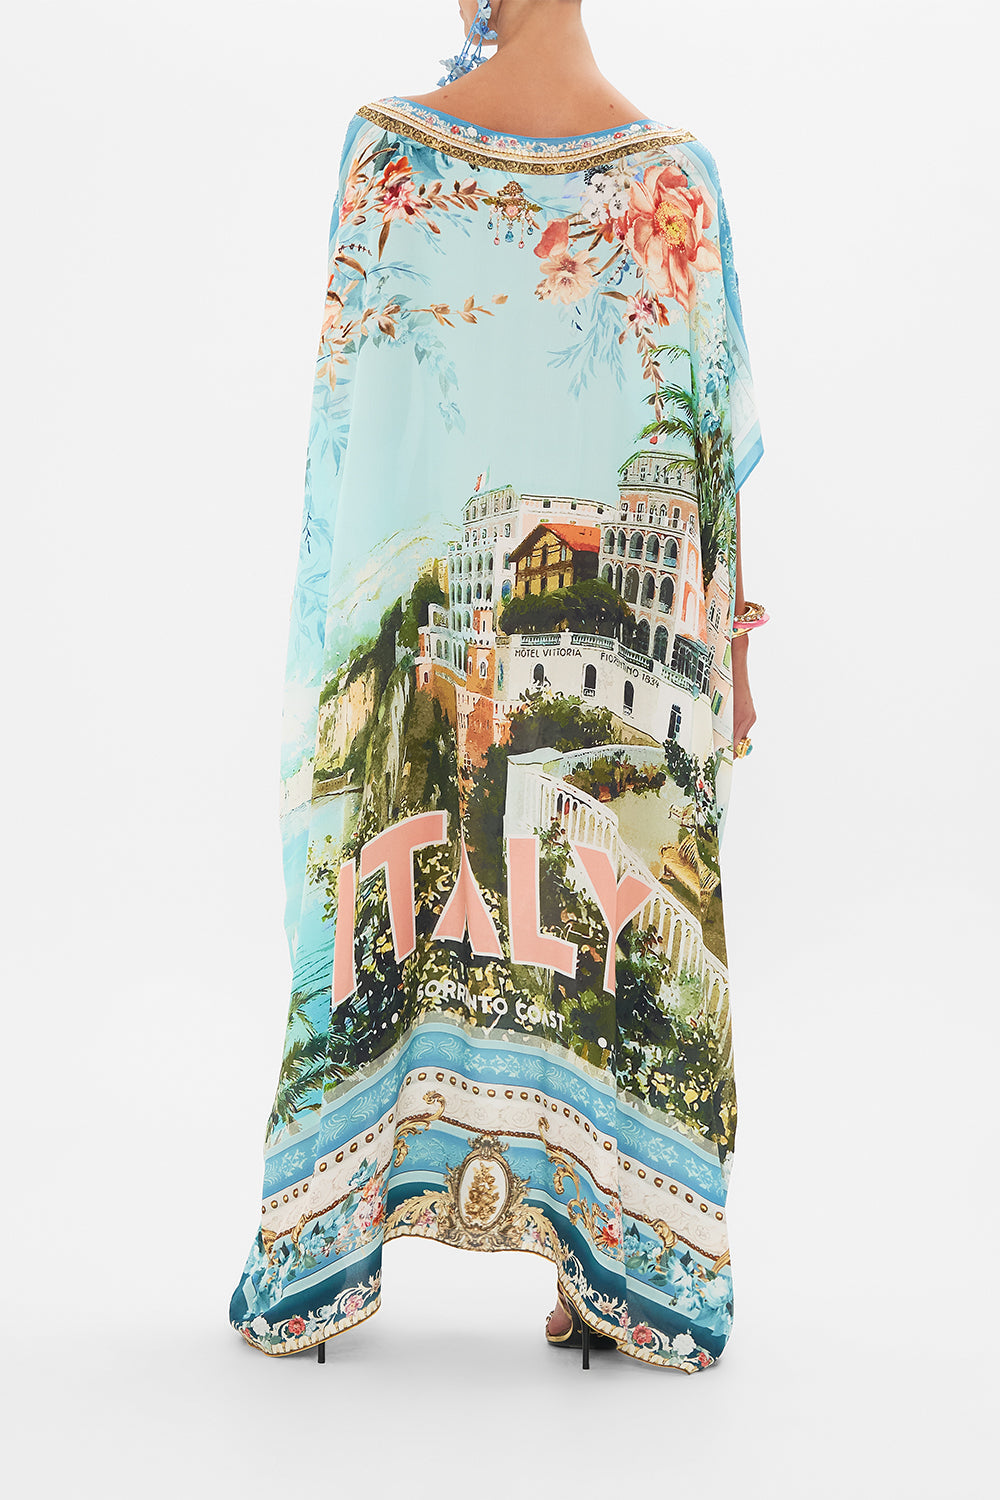 Back view of model wearing CAMILLA silk kaftan in From Sorrento With Love print